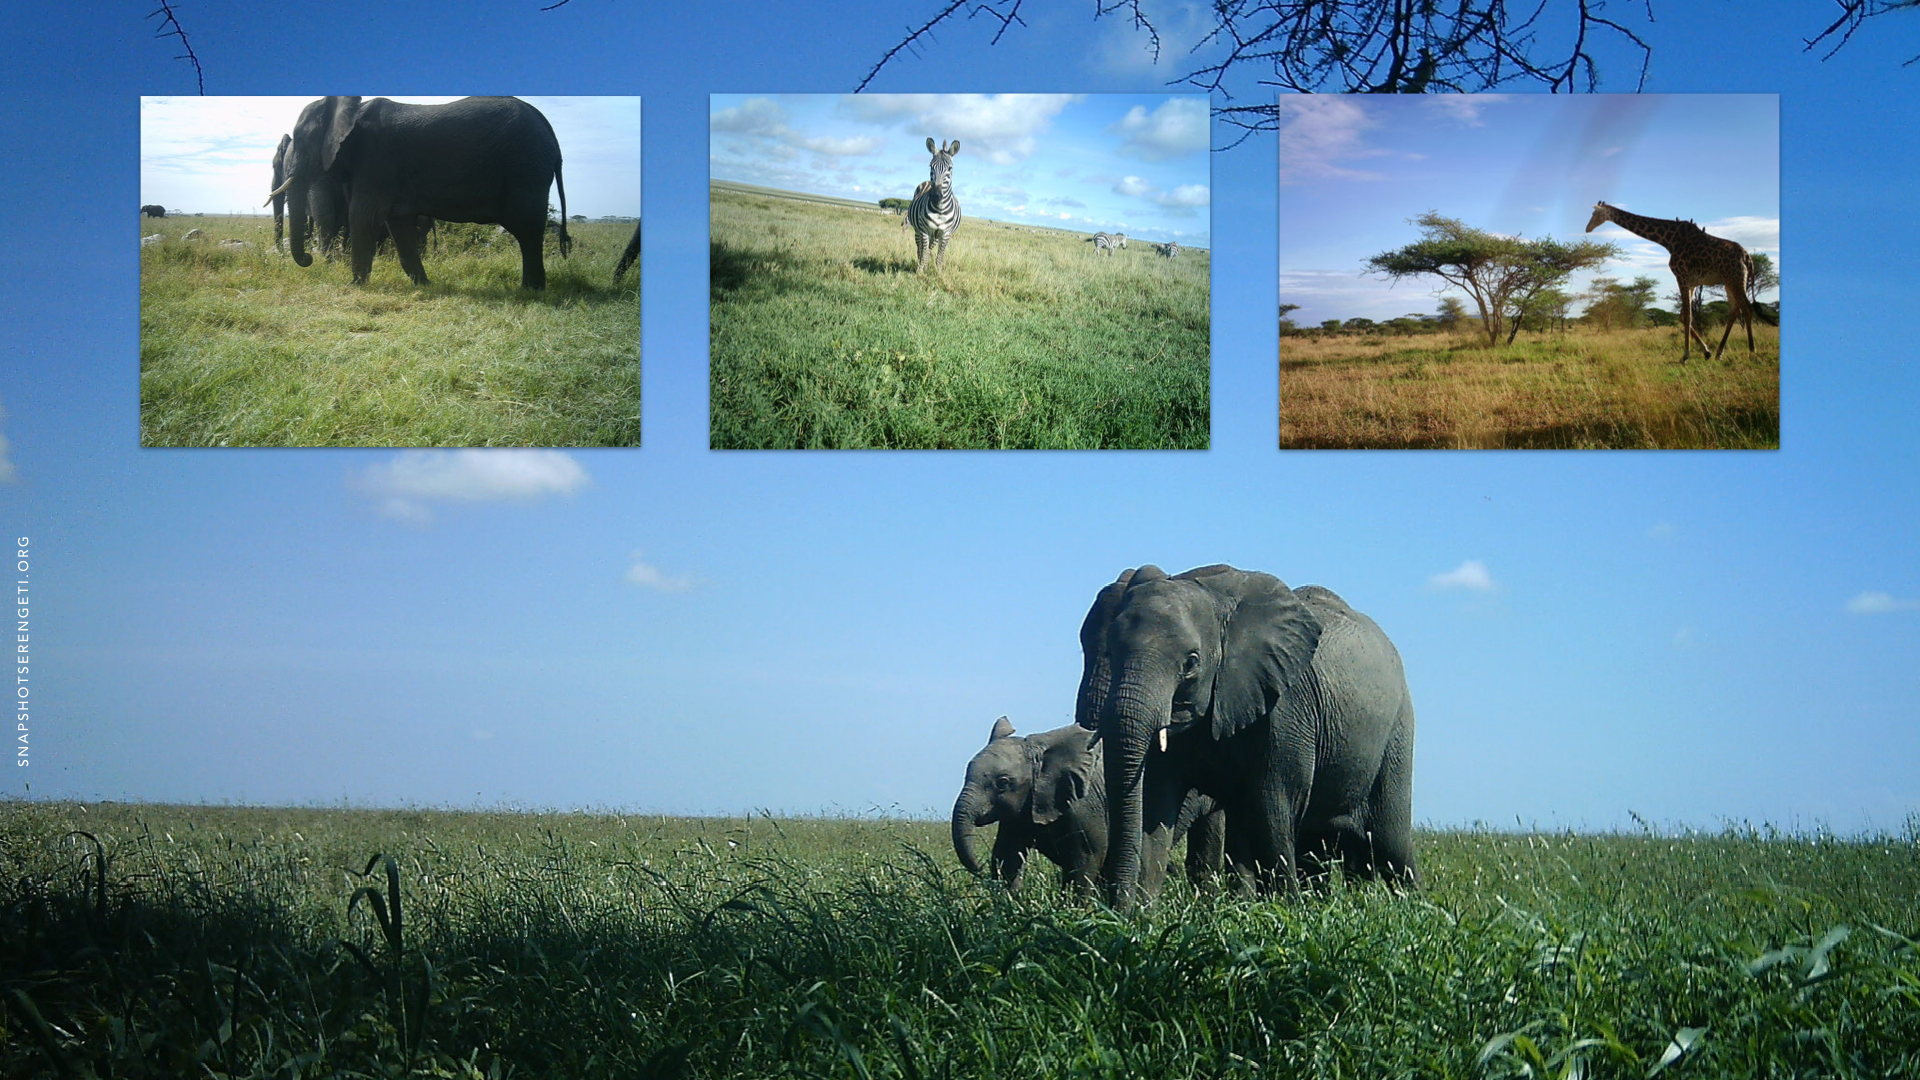 Examples of images from the Snapshot Serengeti project. Image: Zooniverse 